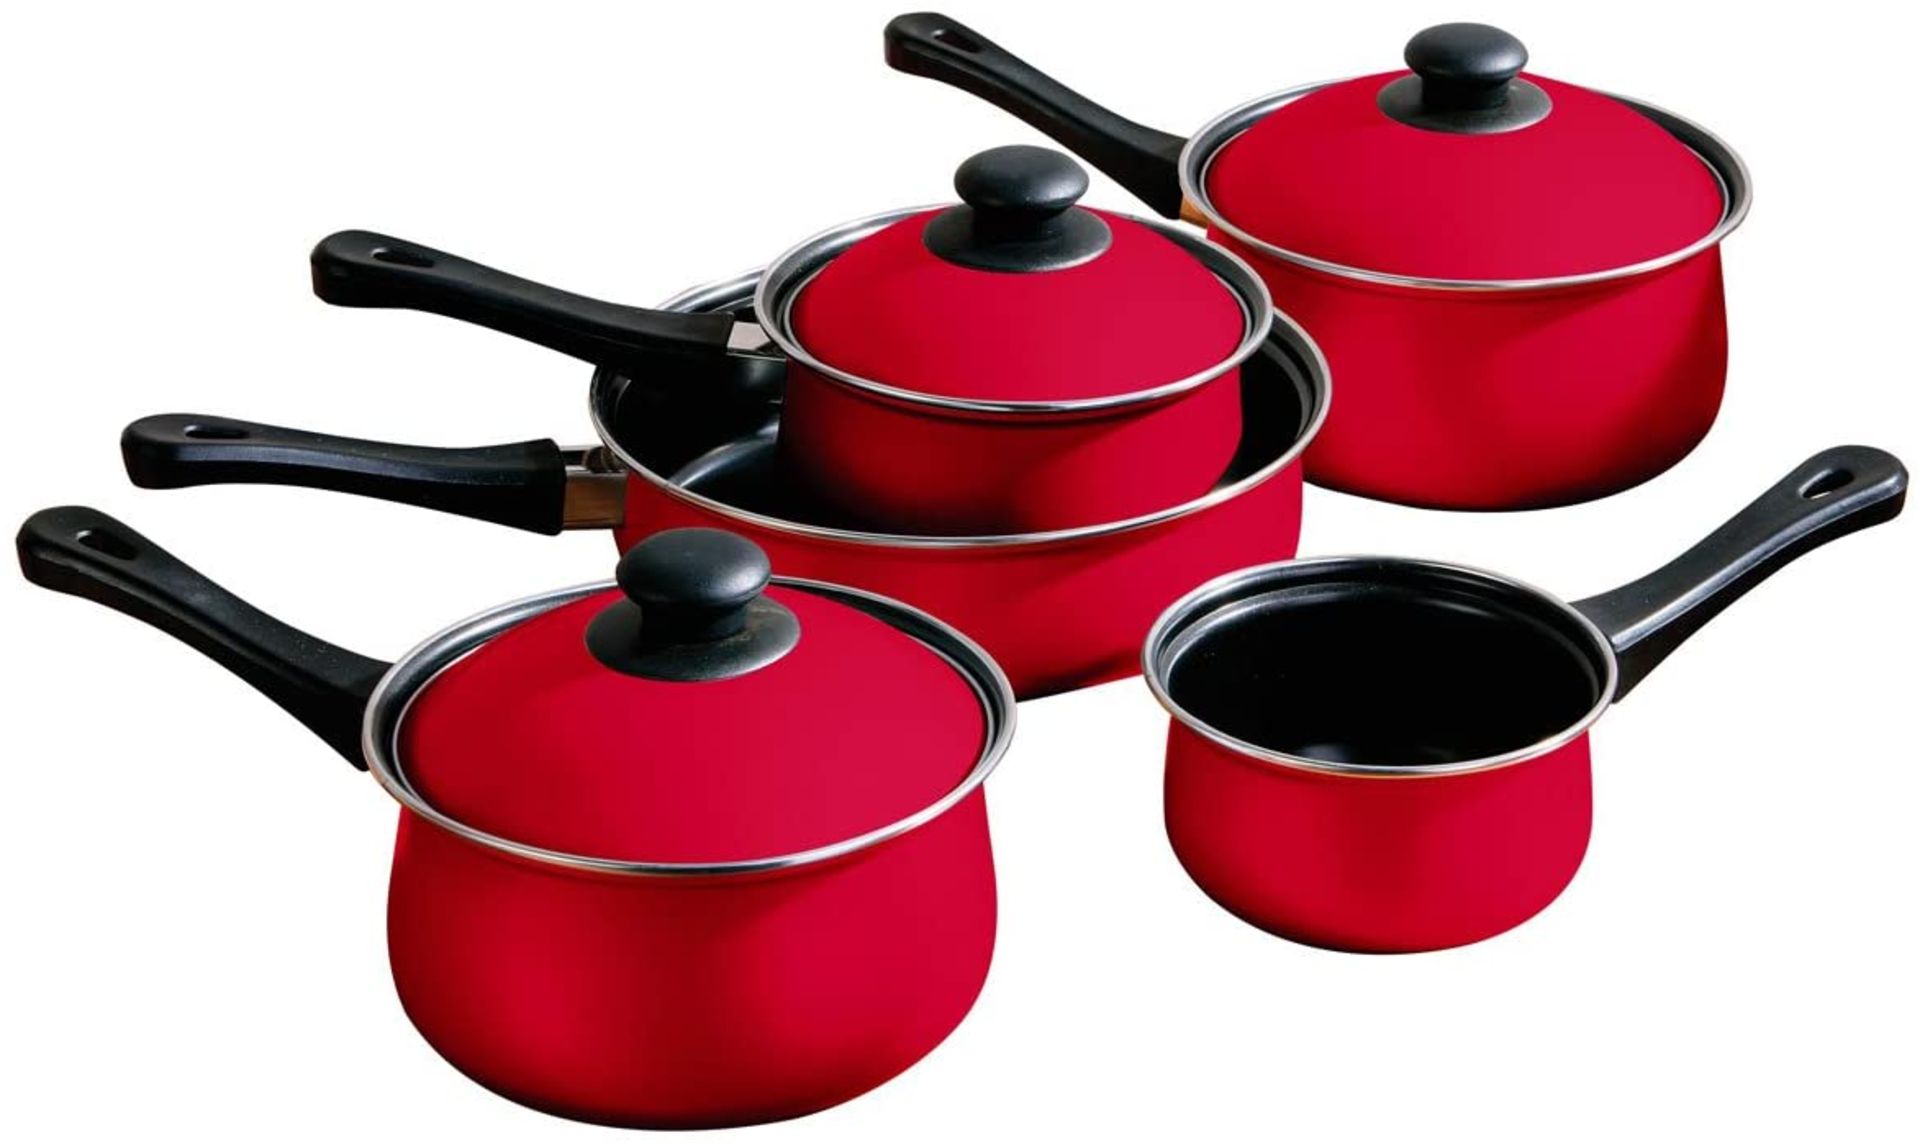 BOXED PREMIER HOUSEARES NON STICK CARBON STEEL WITH BAELITE HANDLES RED RRP £32.50Condition